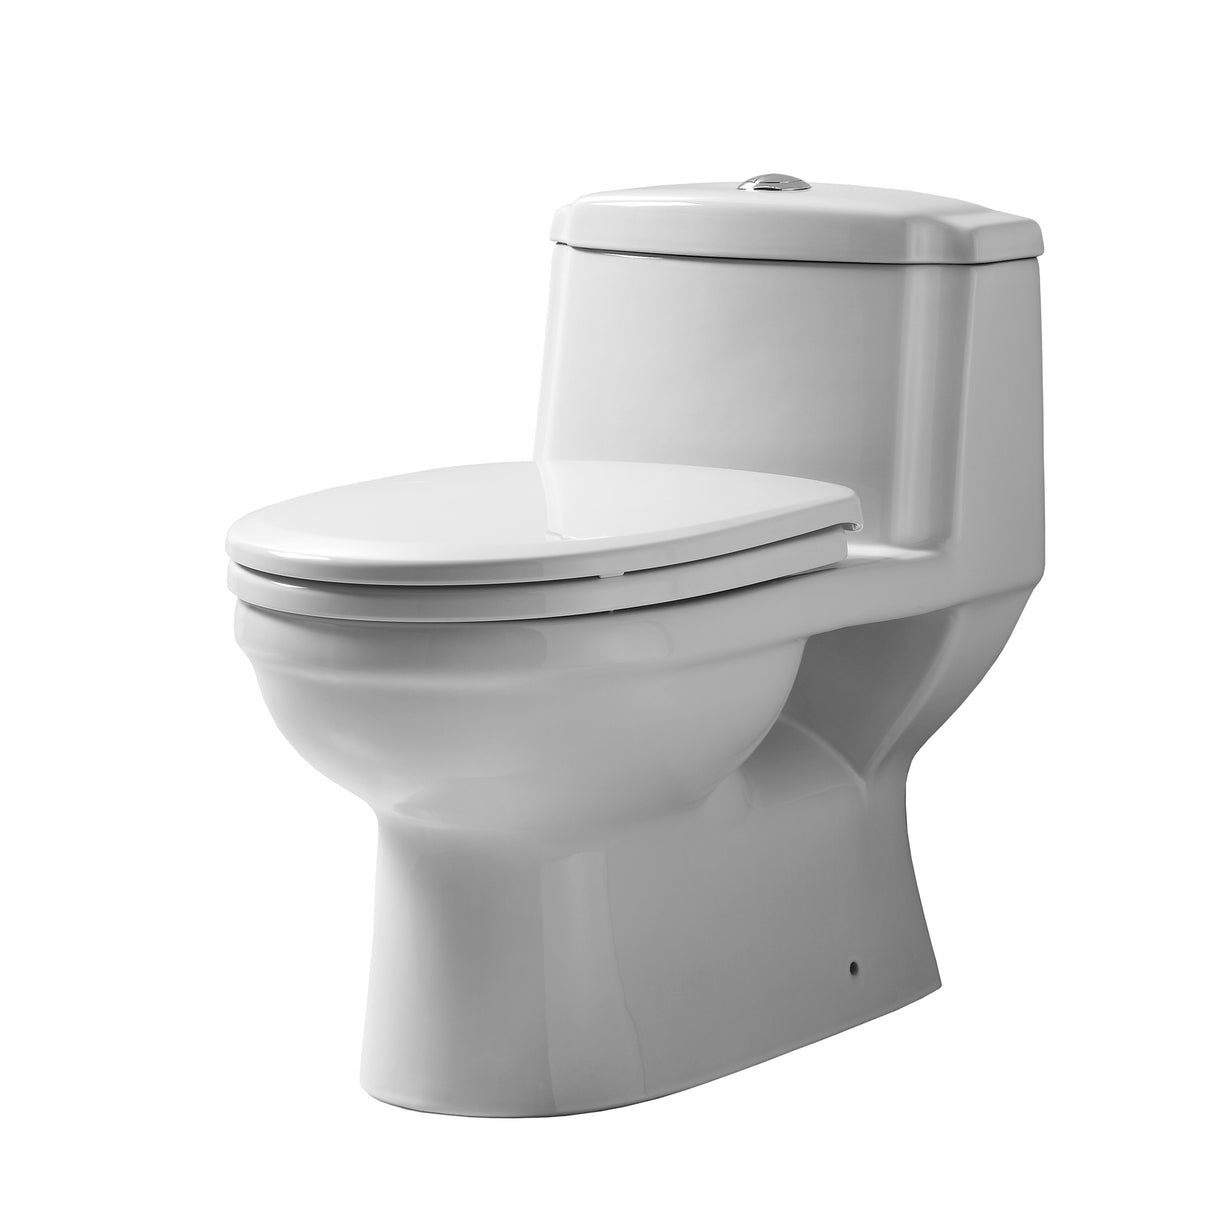 Magic Flush Eco-Friendly One Piece Toilet with a Siphonic Action Dual Flush System,  Elongated Bowl, 1.6/1.1 GPF and WaterSense Certified